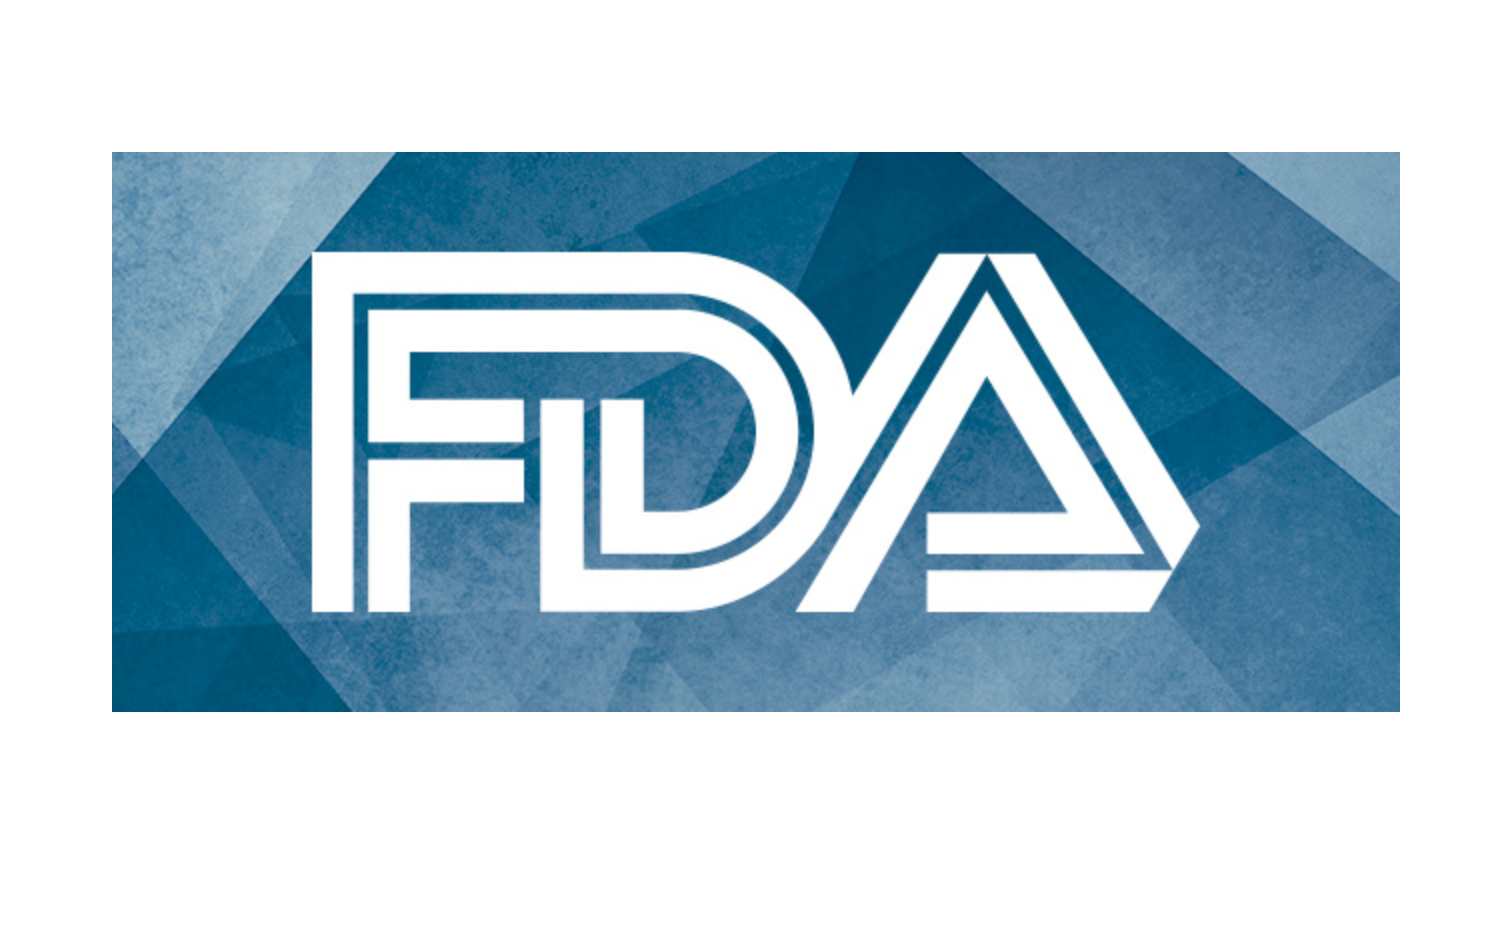 FDA Authorizes Changes to Simplify Use of Bivalent mRNA COVID-19 Vaccines